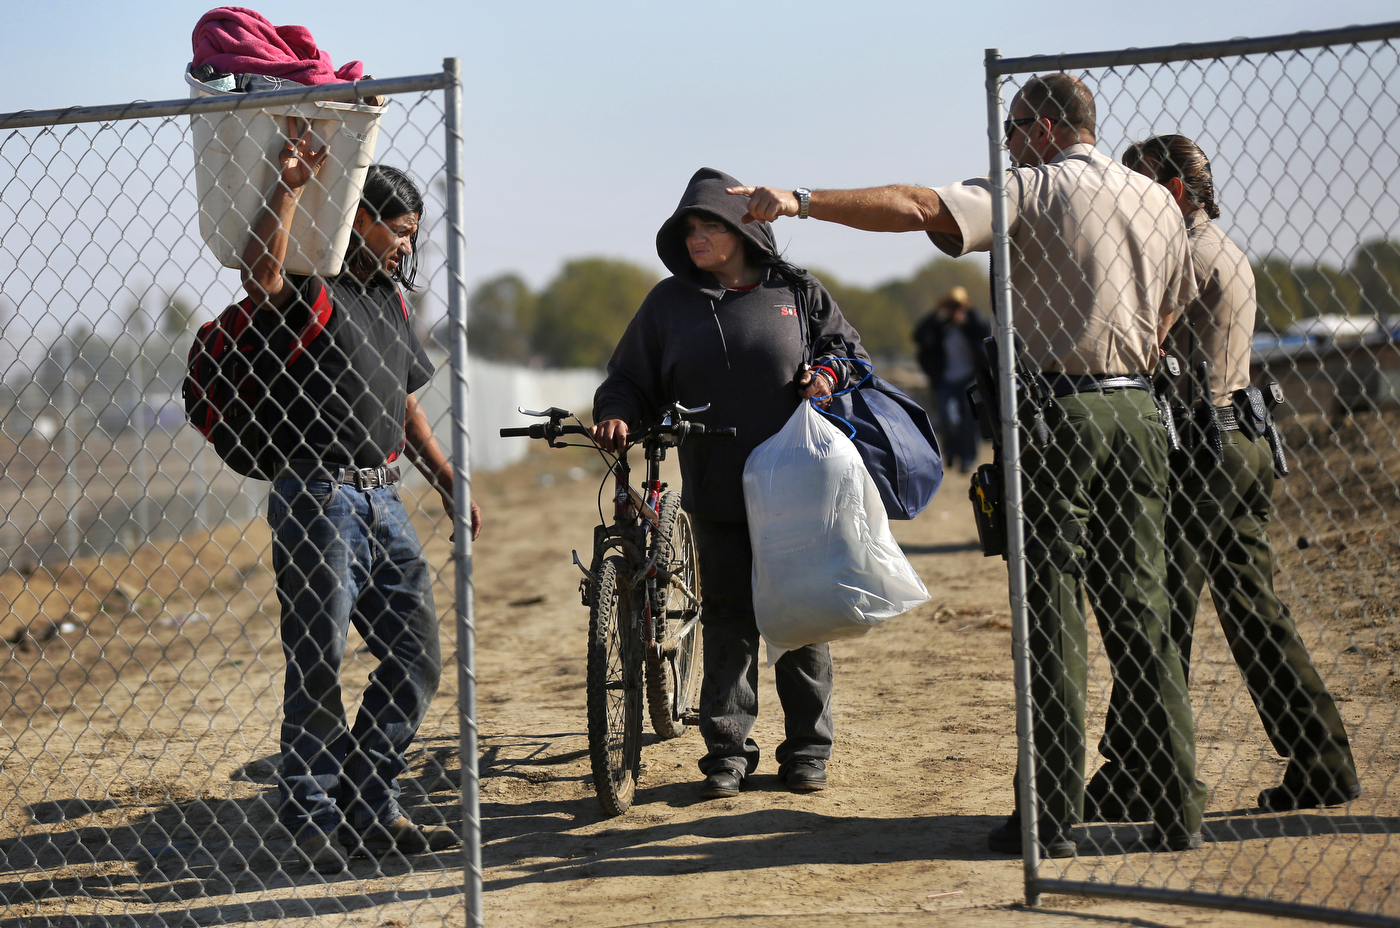 Maricela Montejano, 49, center, and Gerardo “Gerry{quote} Anzorena, both residents of the shantytown, clutch their belongings as they are directed by Fresno County Sheriff's officers out of a temporary fence line surrounding the encampment during the eviction.